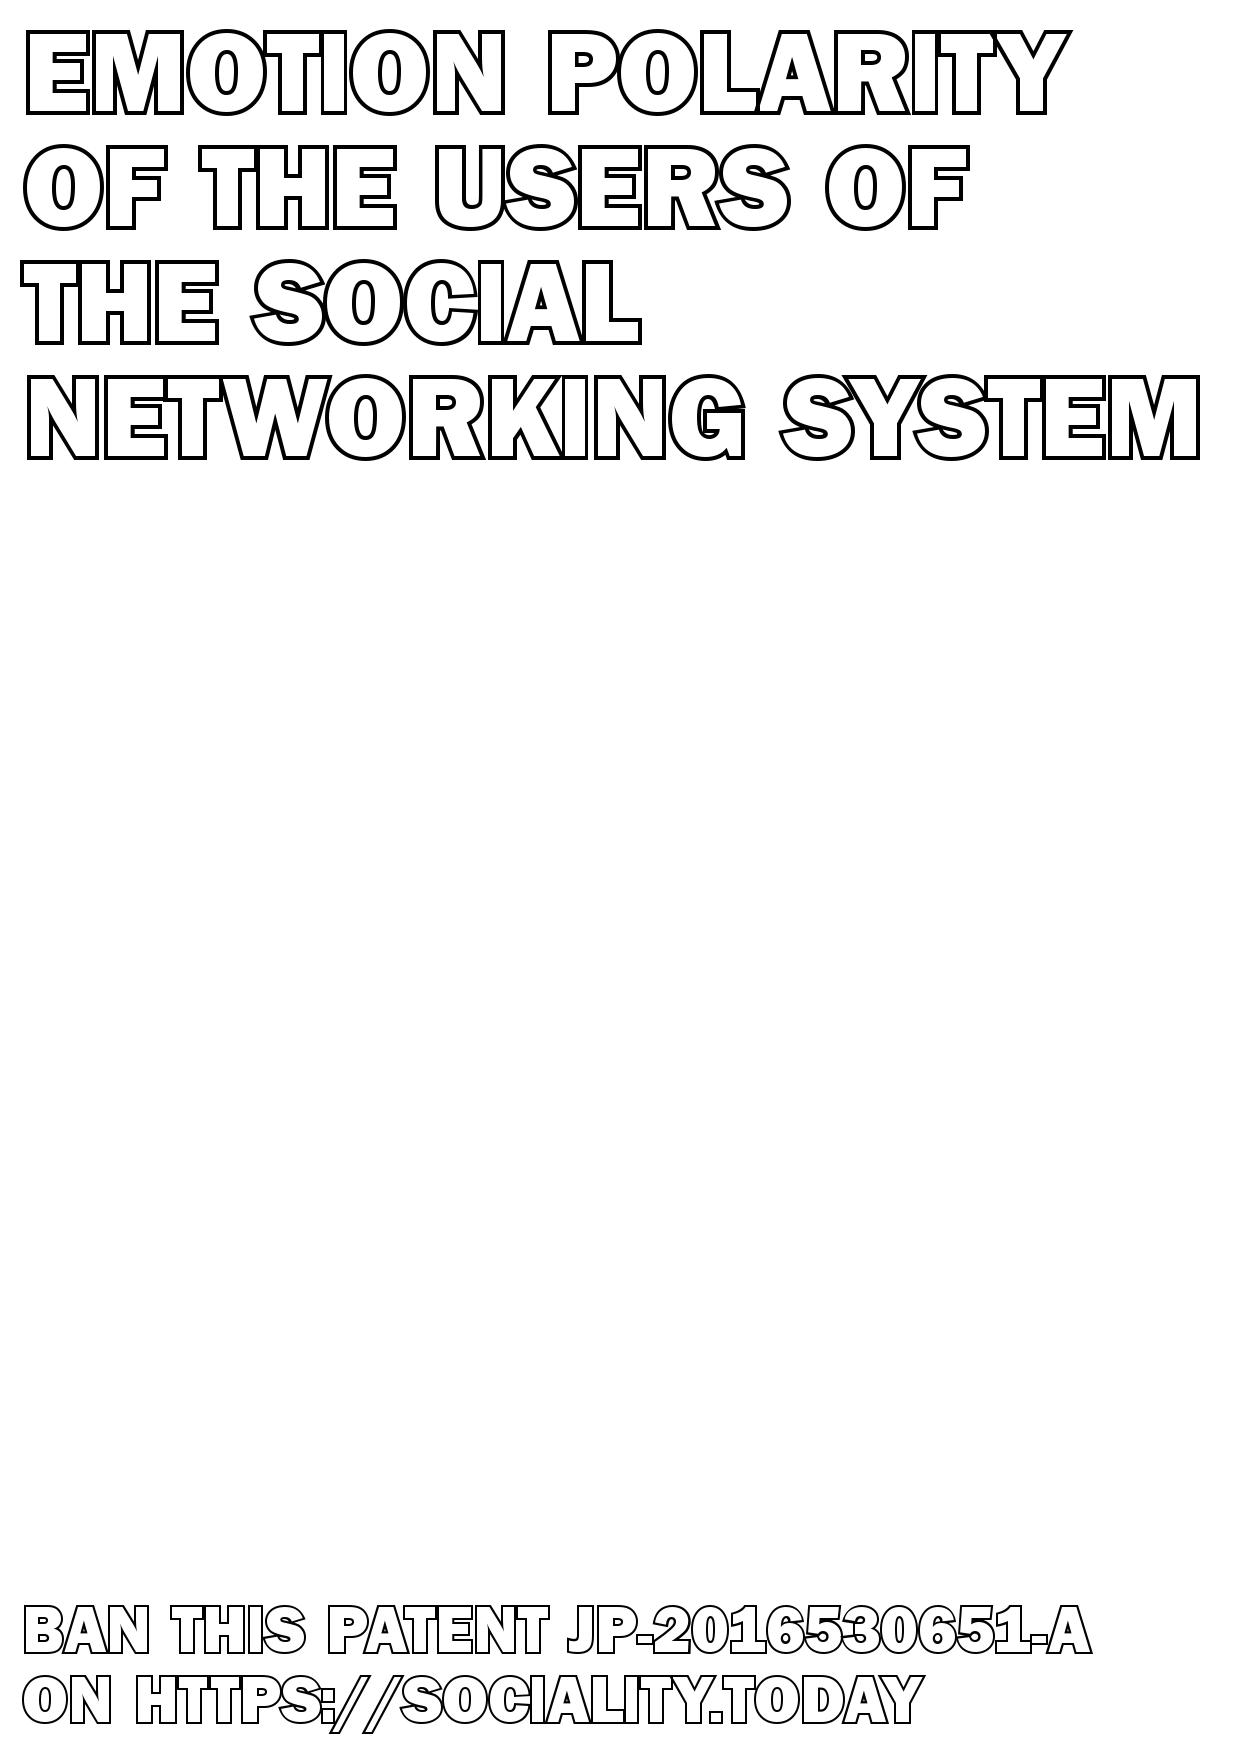 Emotion polarity of the users of the social networking system  - JP-2016530651-A